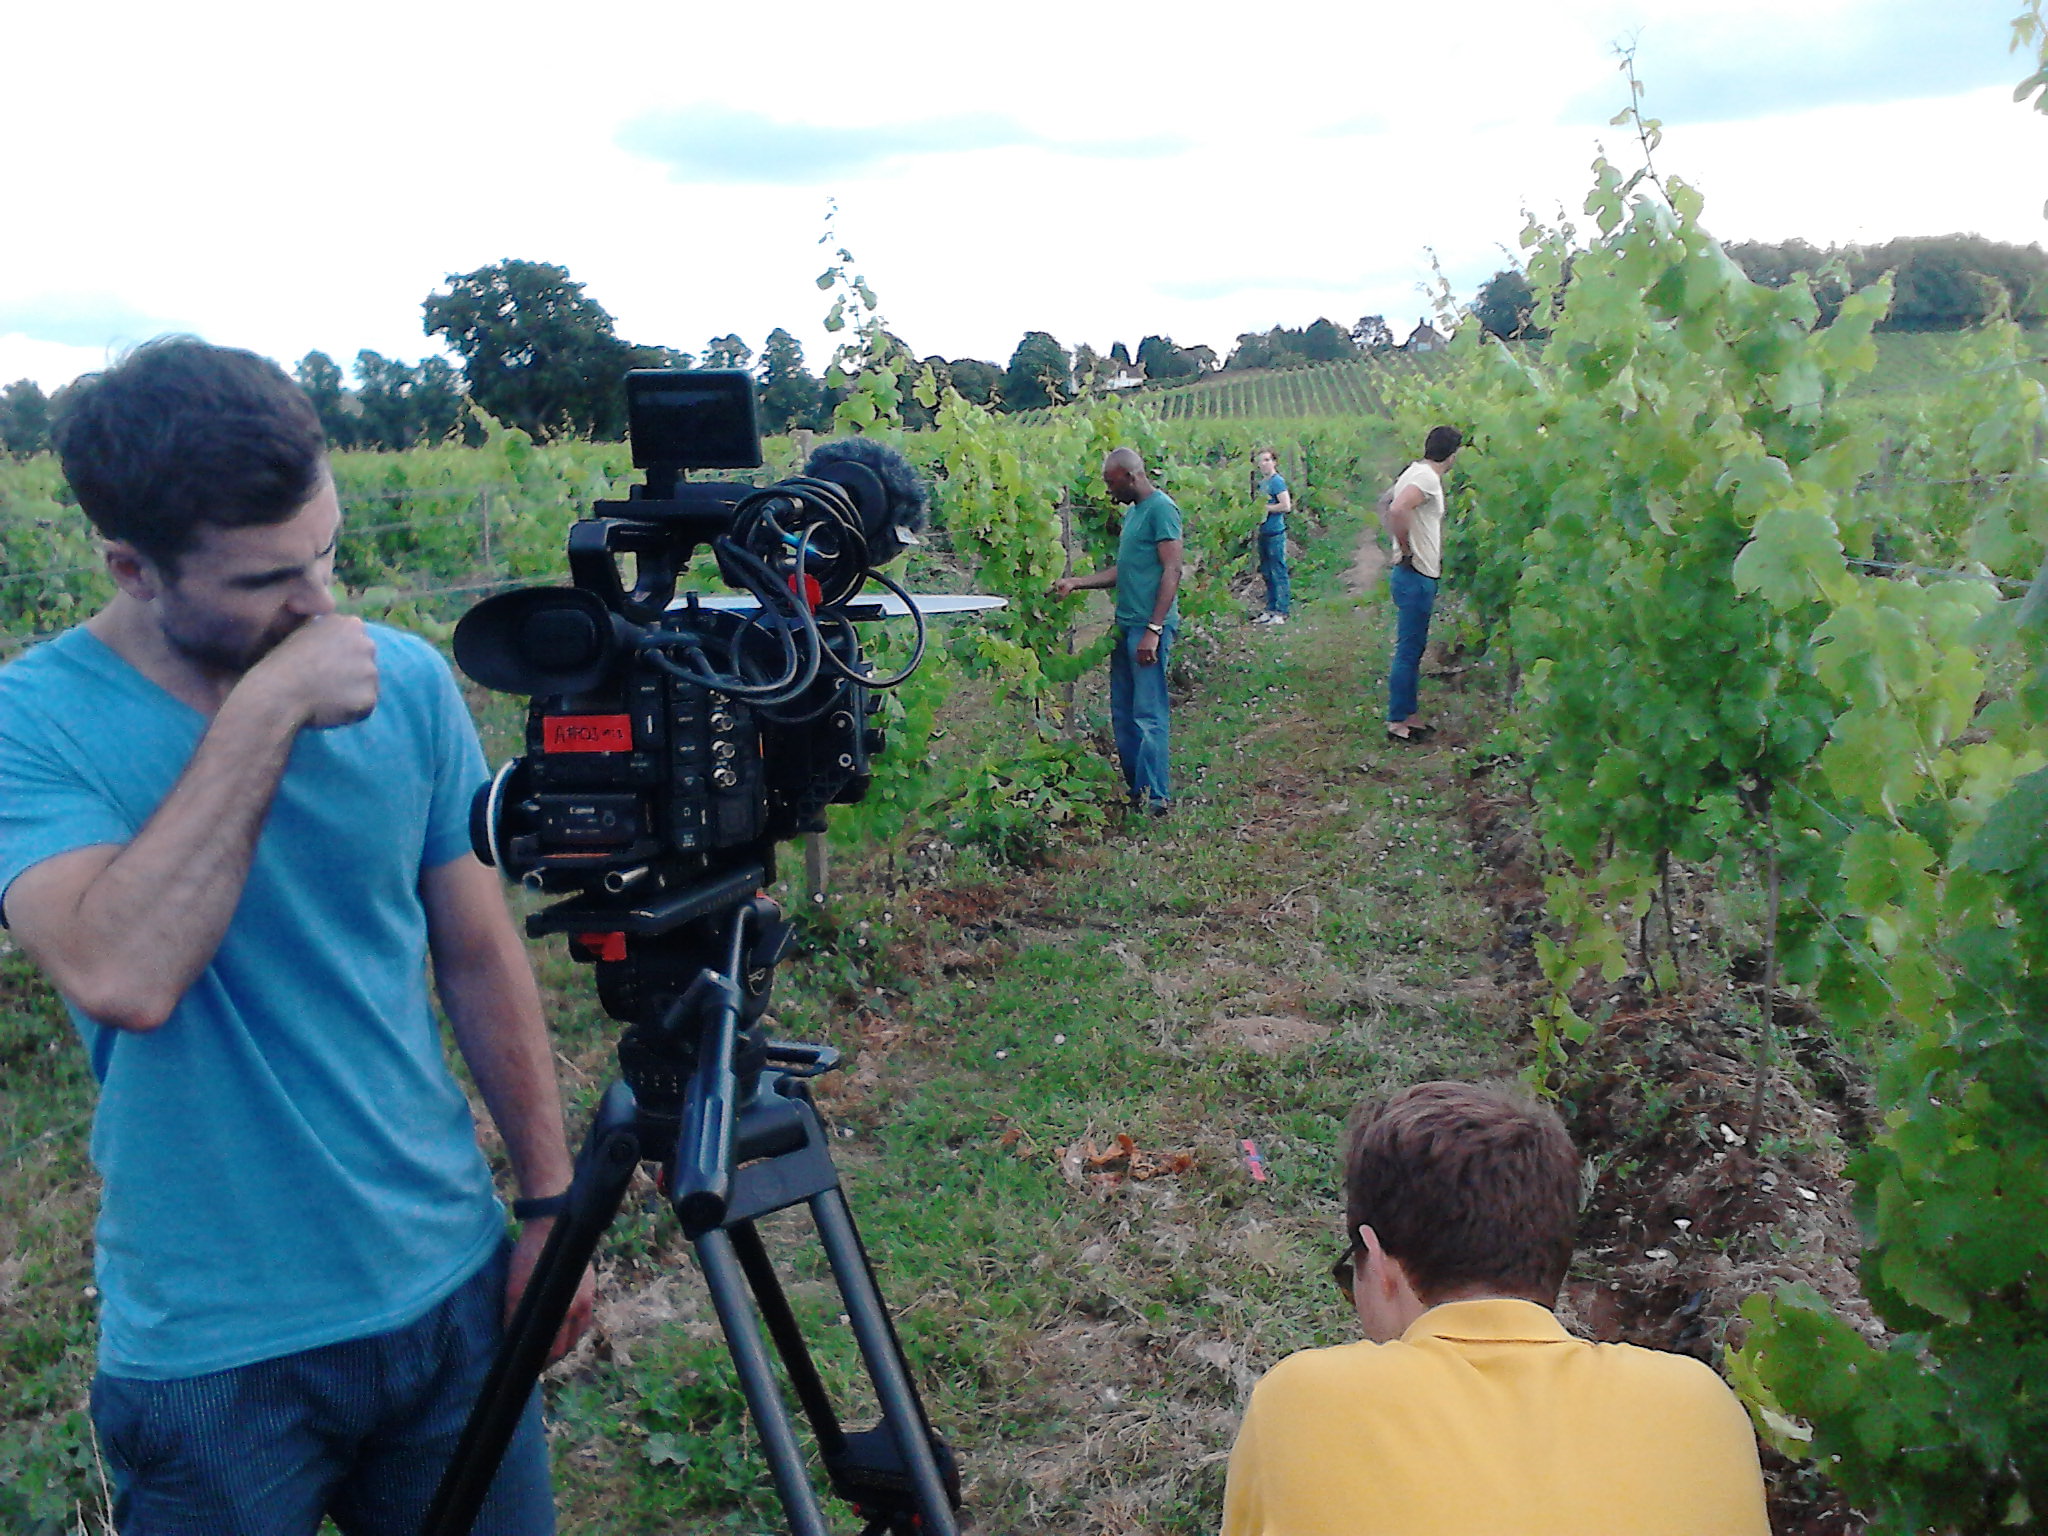 David Olawale Ayinde, with some fellow actors featuring in a Sainsburys Commercial, filming in Dennies Vineyard, Cobham, UK